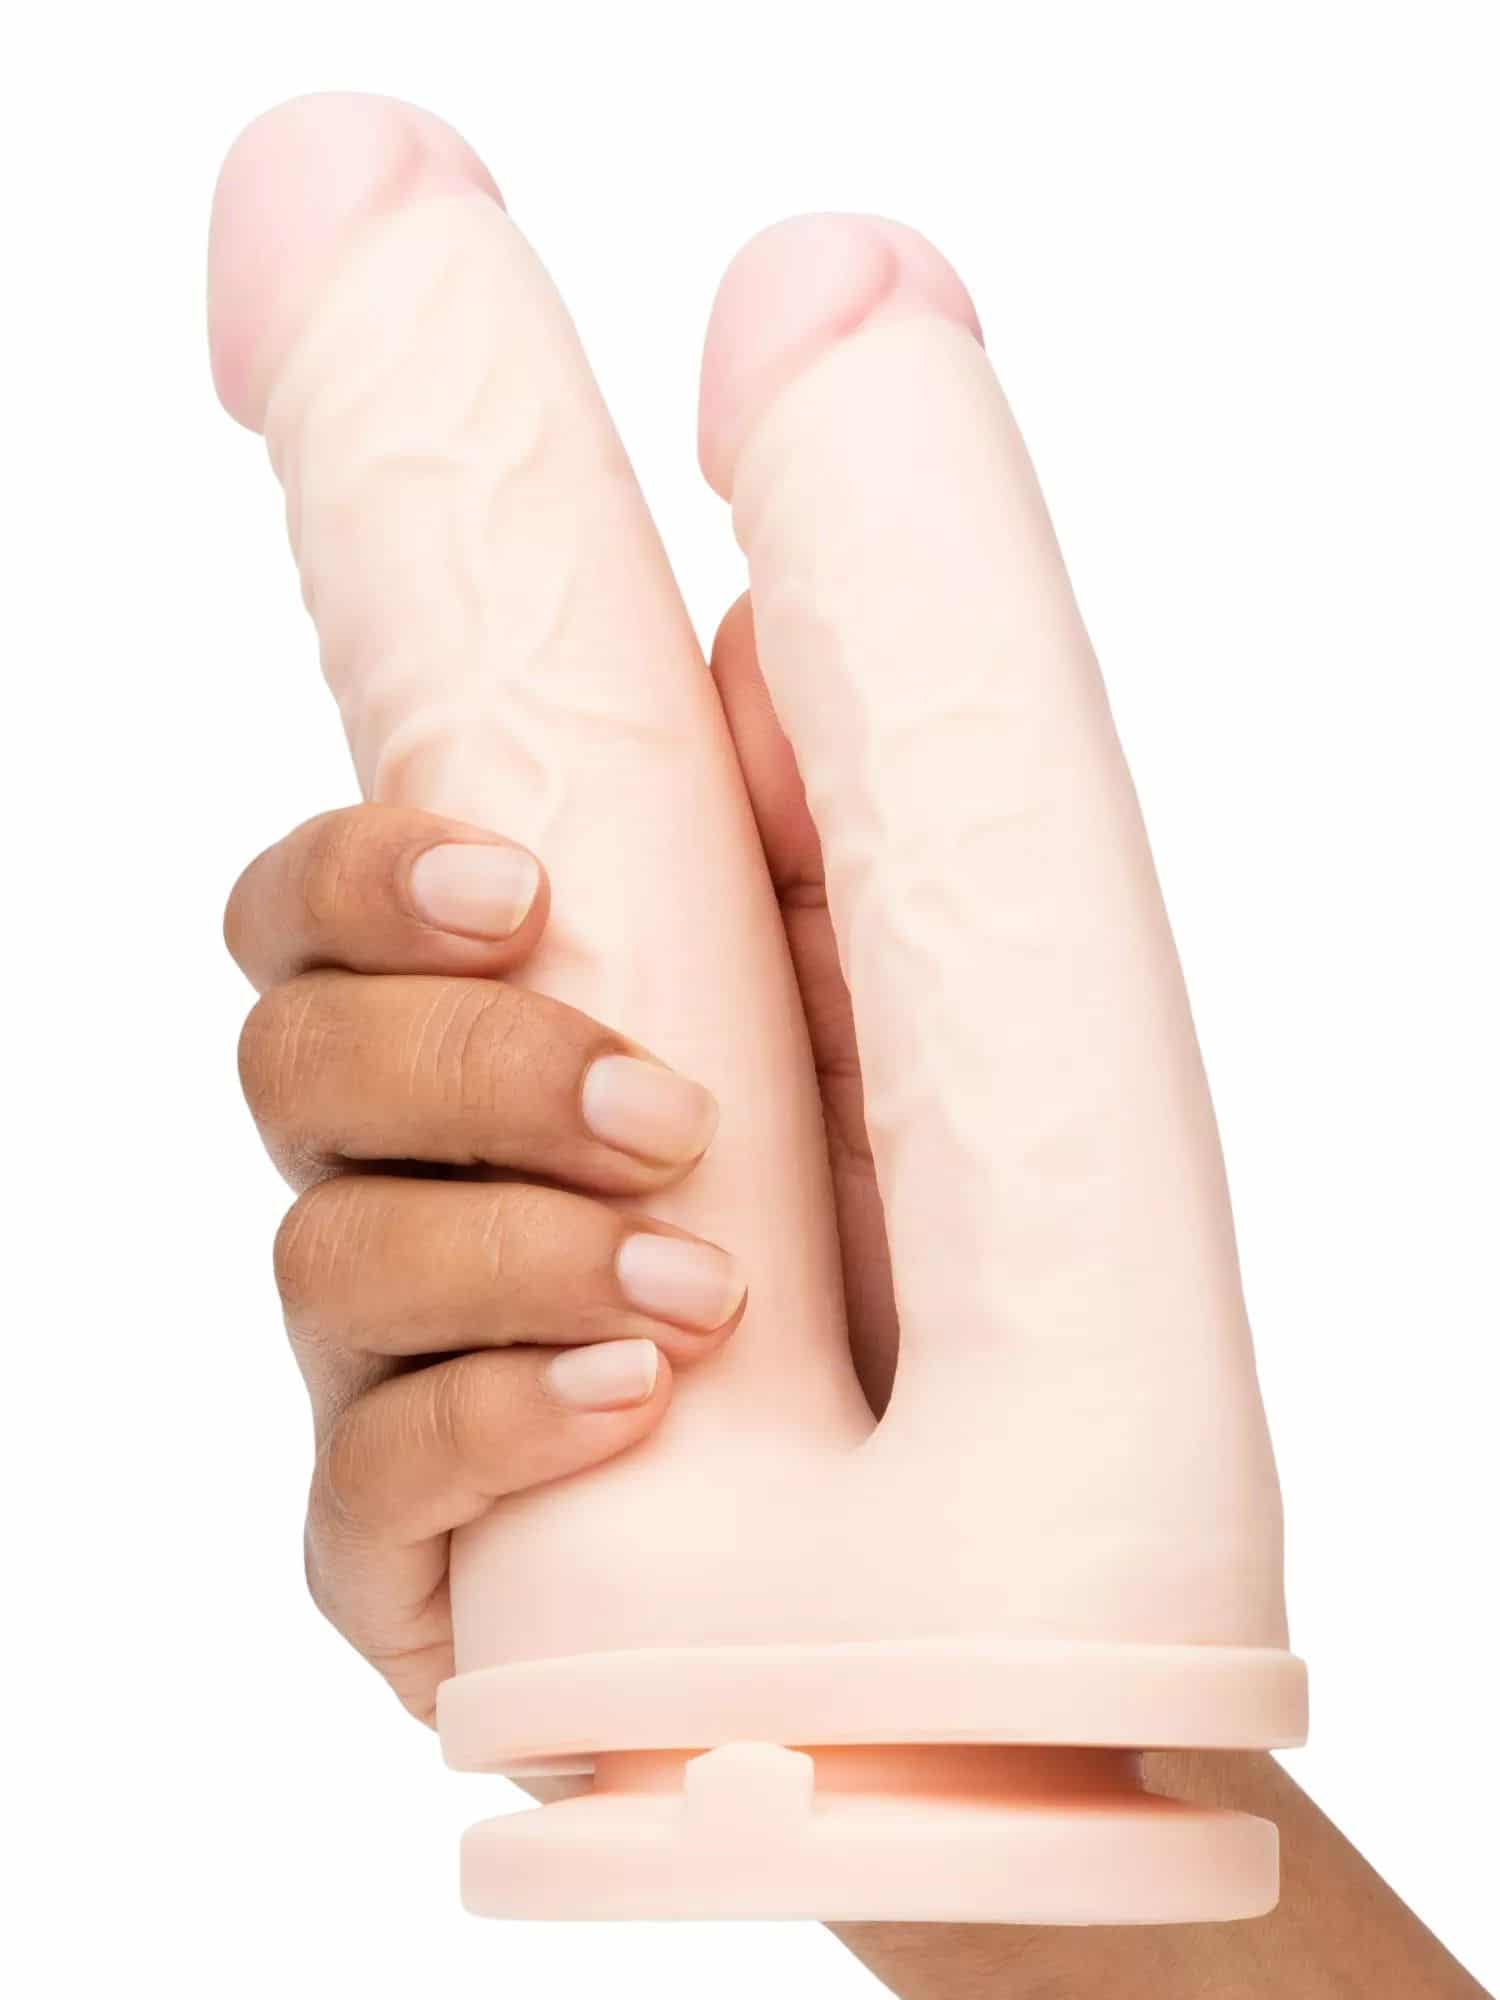 Product Lifelike Lover Double Penetrator Suction Cup Dildo